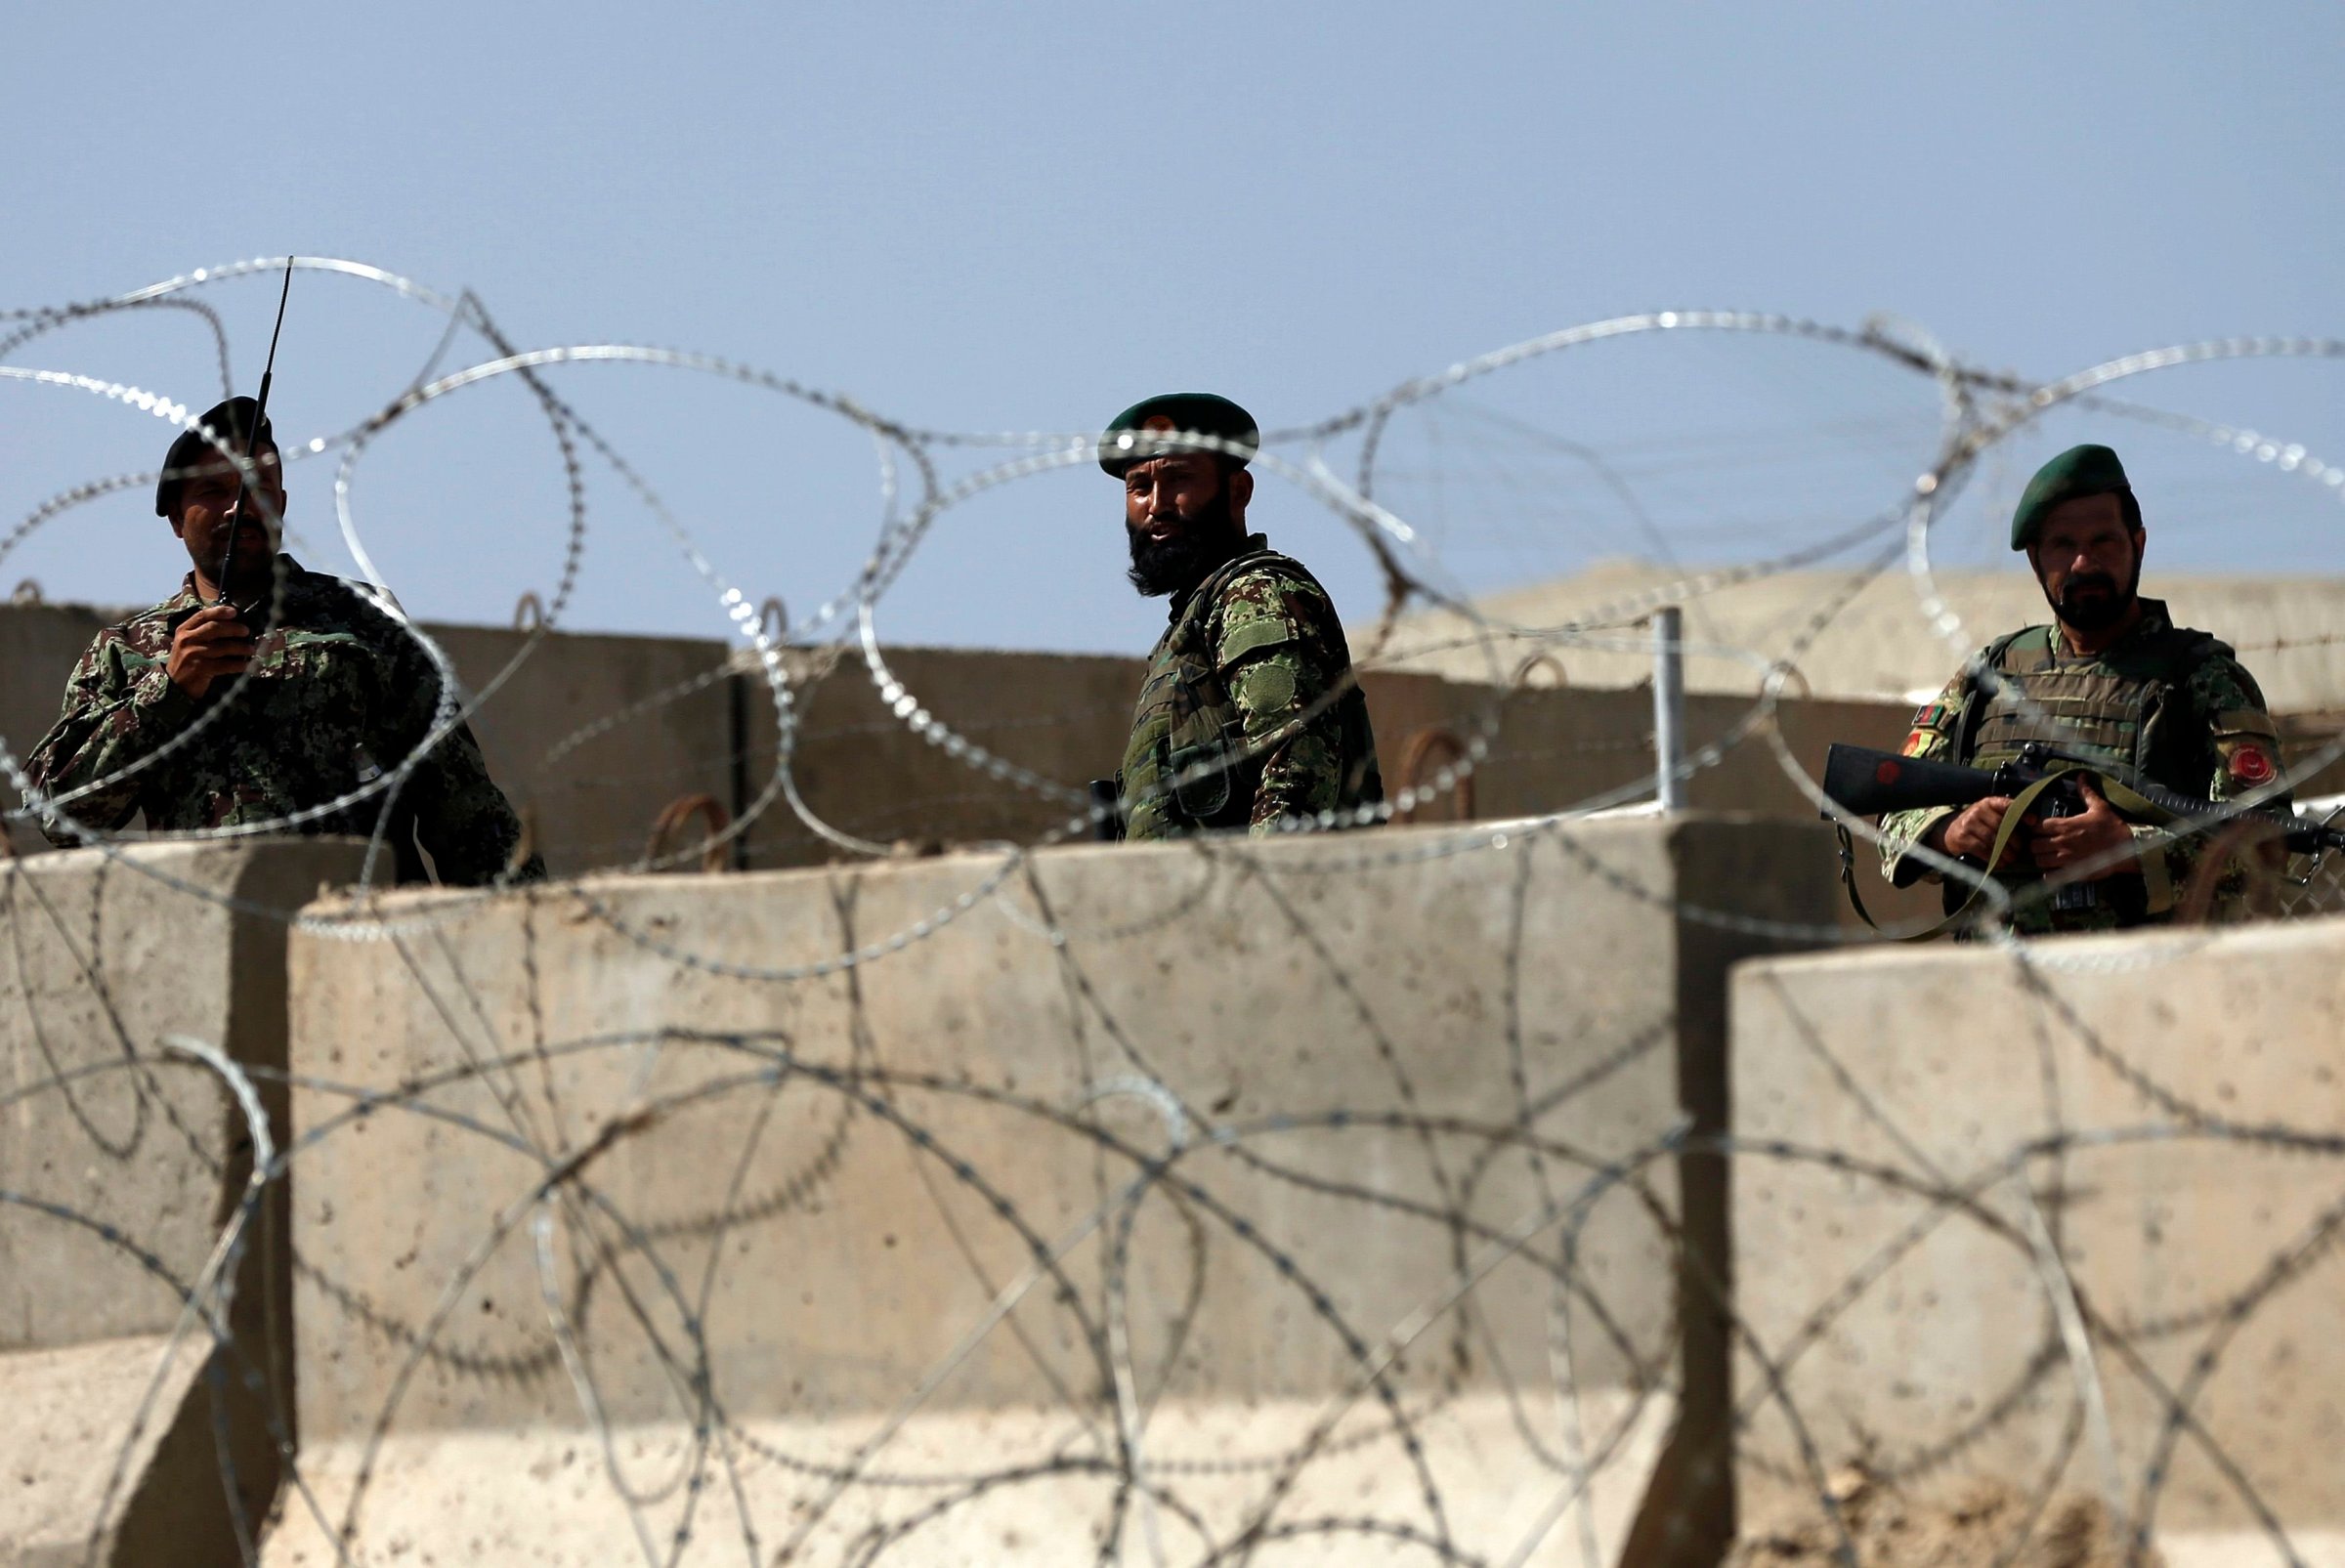 Afghan National Army soldiers keep watch at the gate of a British-run military training academy Camp Qargha, in Kabul on August 5, 2014.